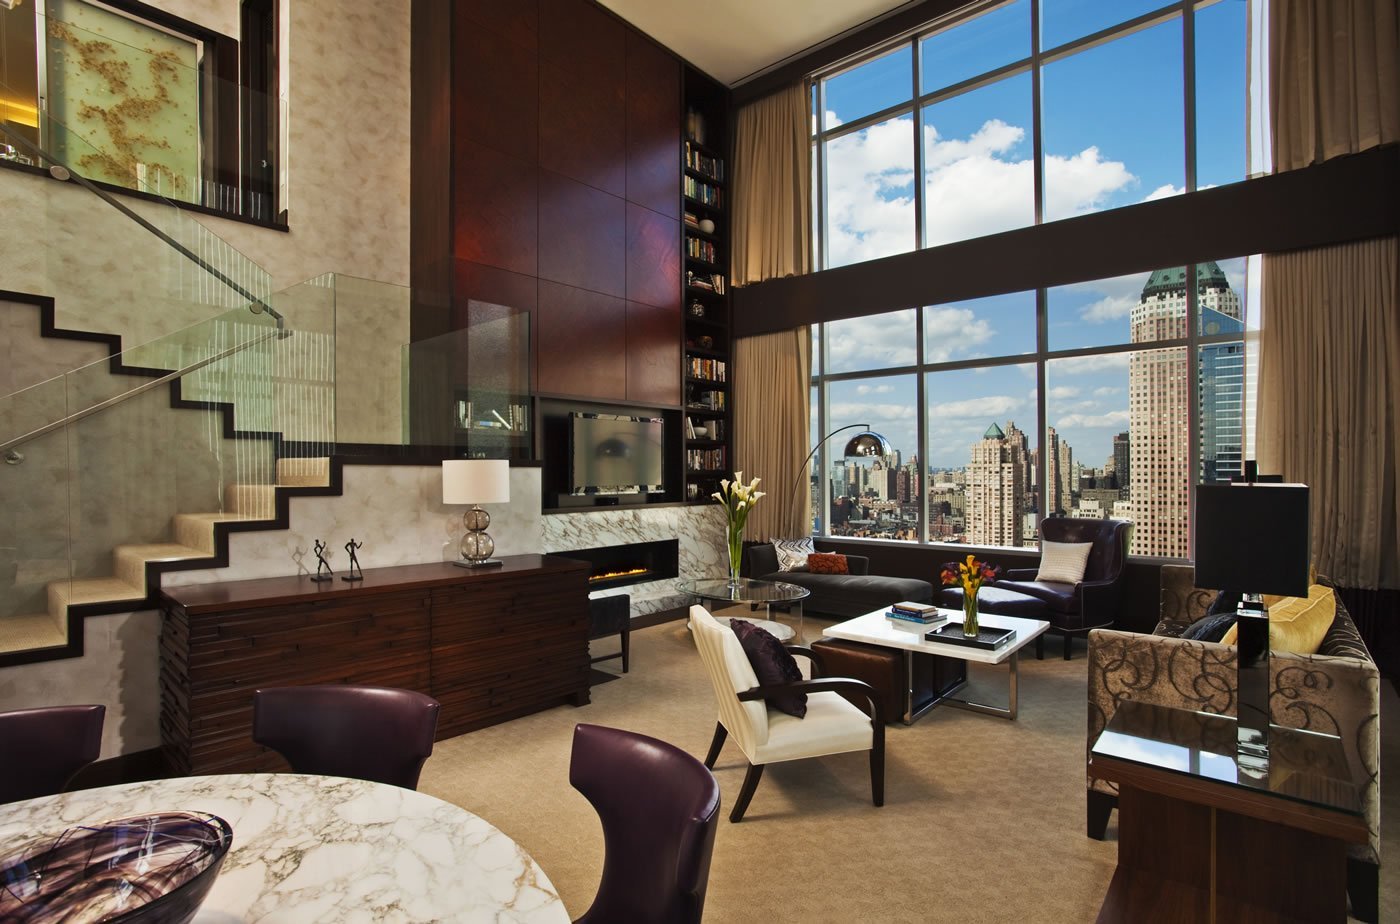 In a mood to splurge? Here are the 7 most decadent suites in New York ...